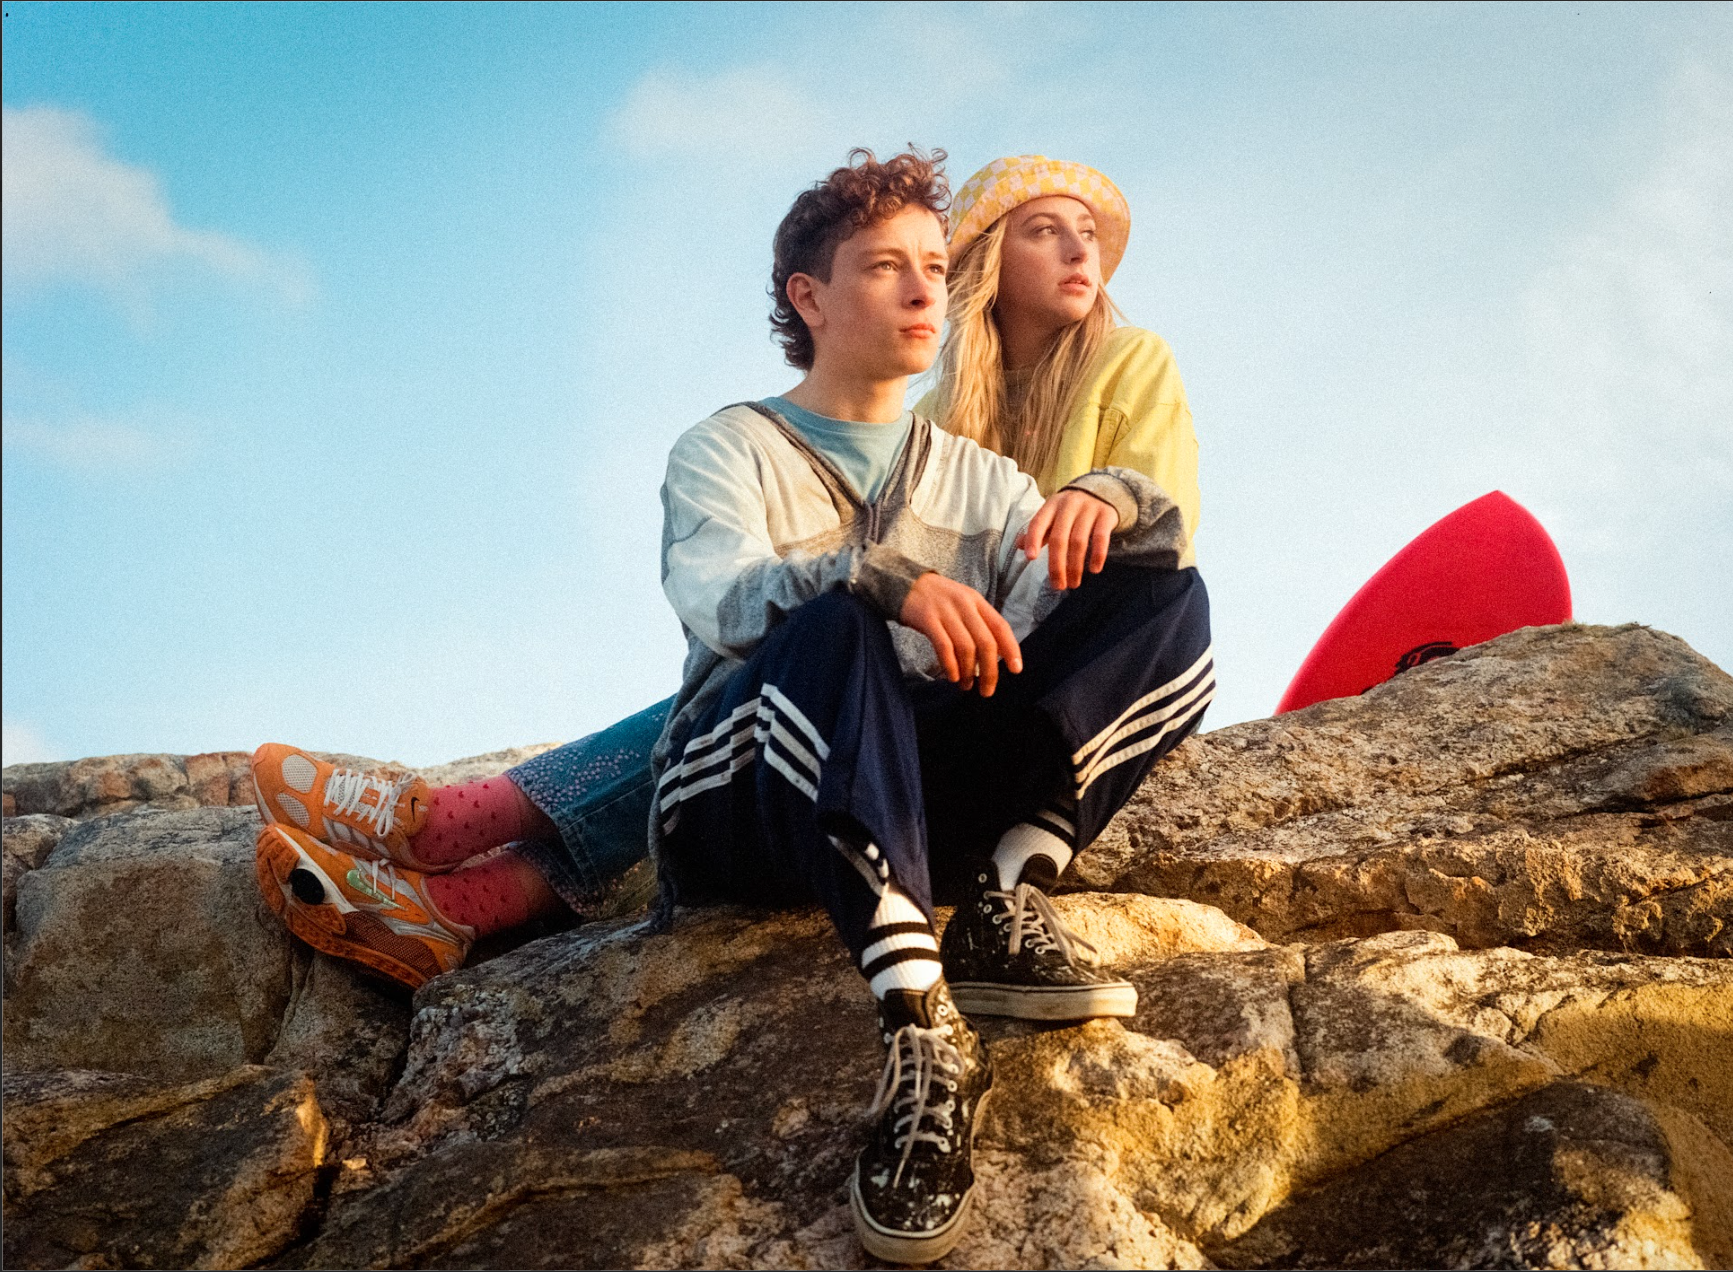 A young boy and a girl sit together on a rocky landscape against a blue sky.